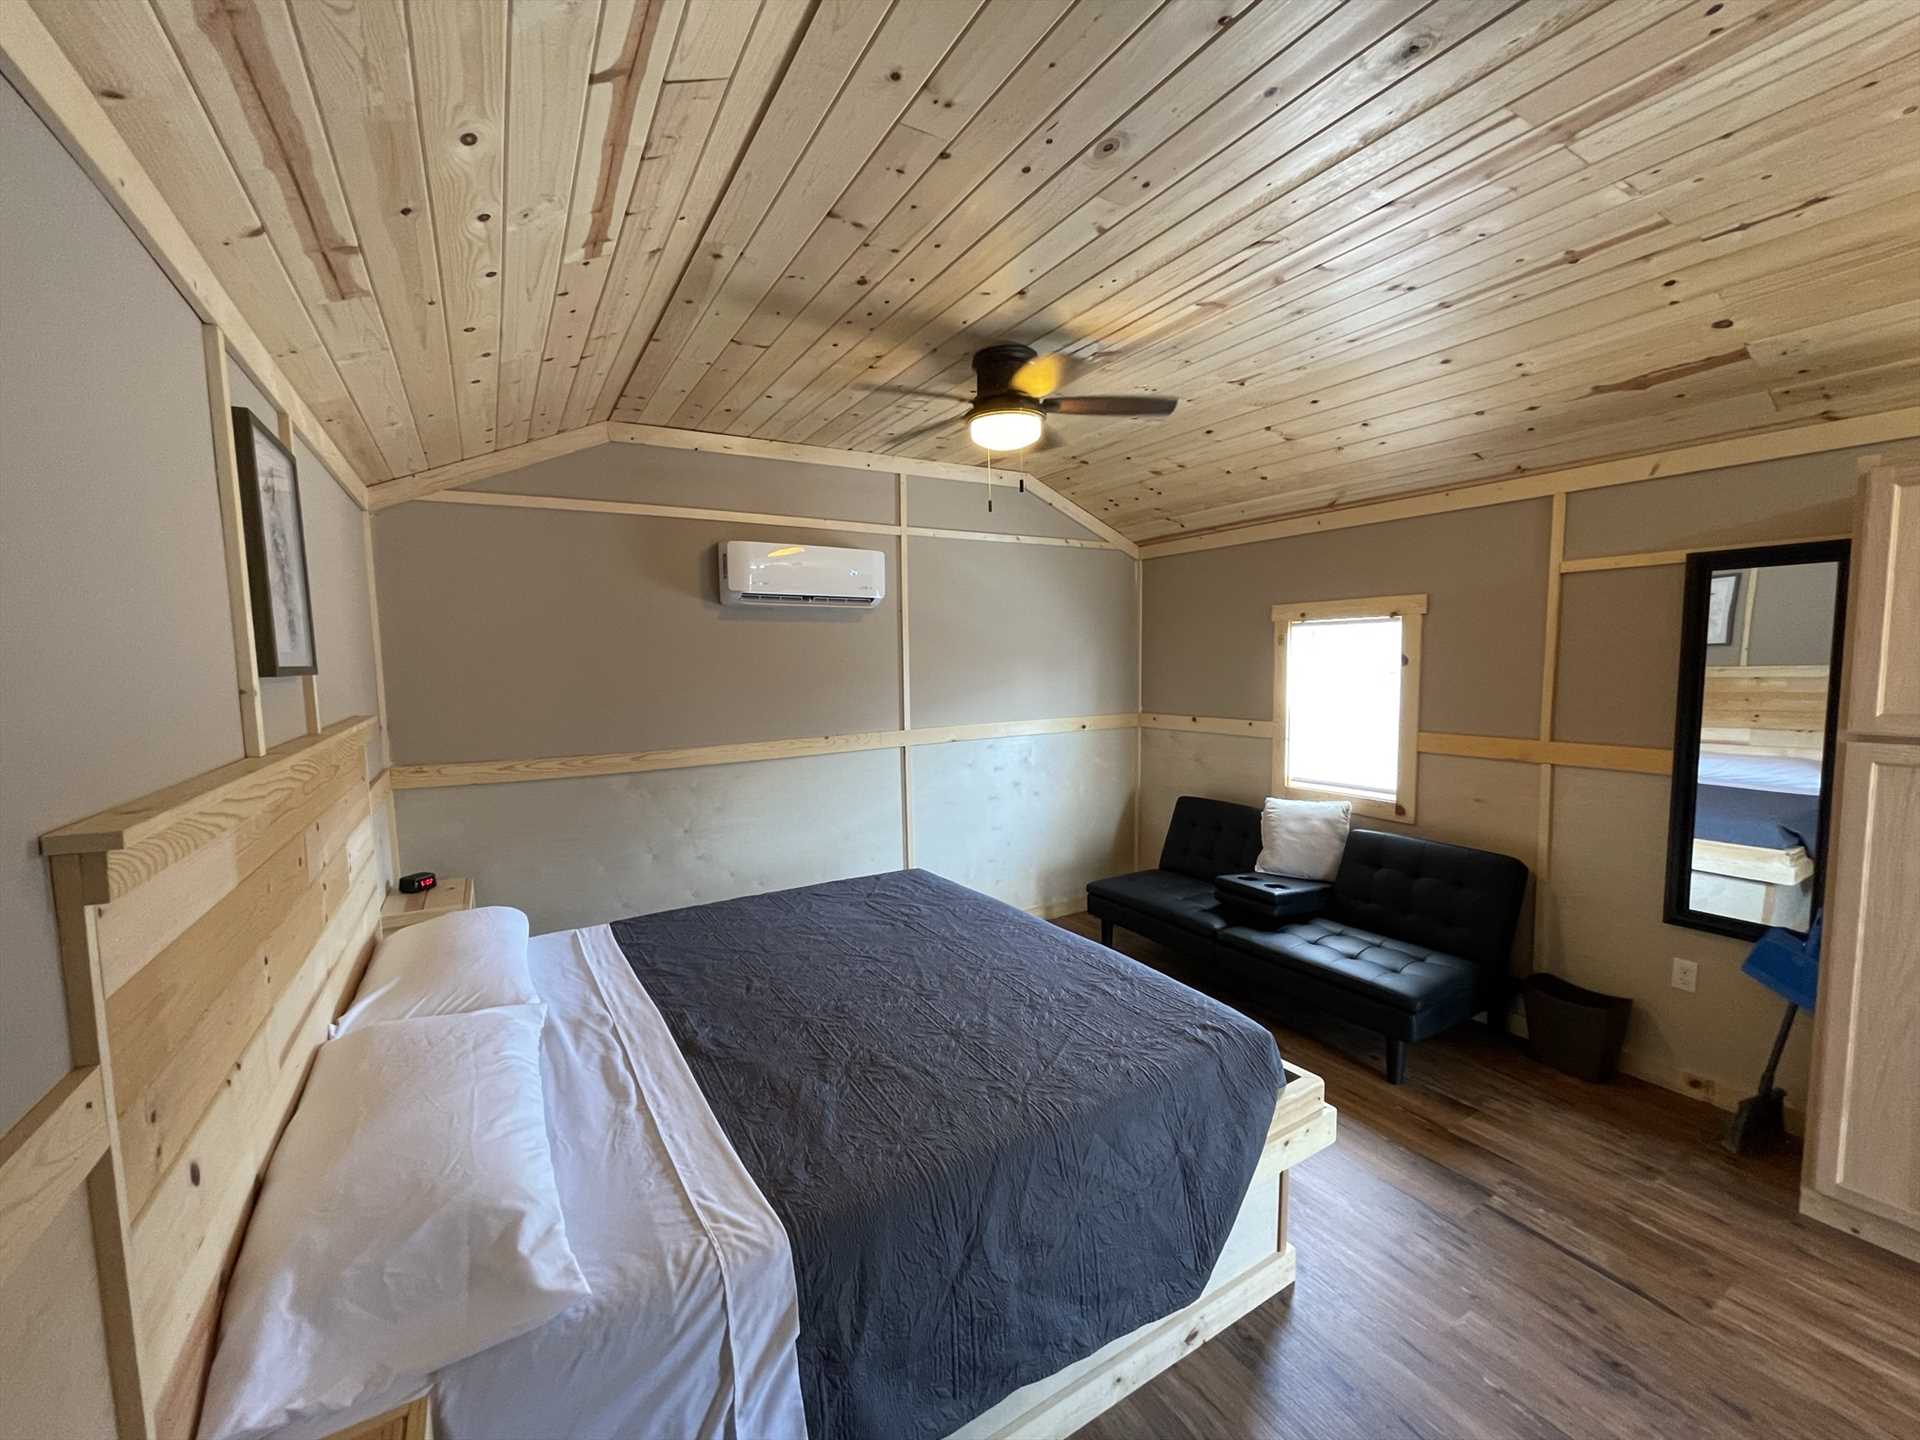                                                 The king-sized bed and futon provide comfortable slumber for three, while AC, heat, and ceiling fans keep the cabin just right.